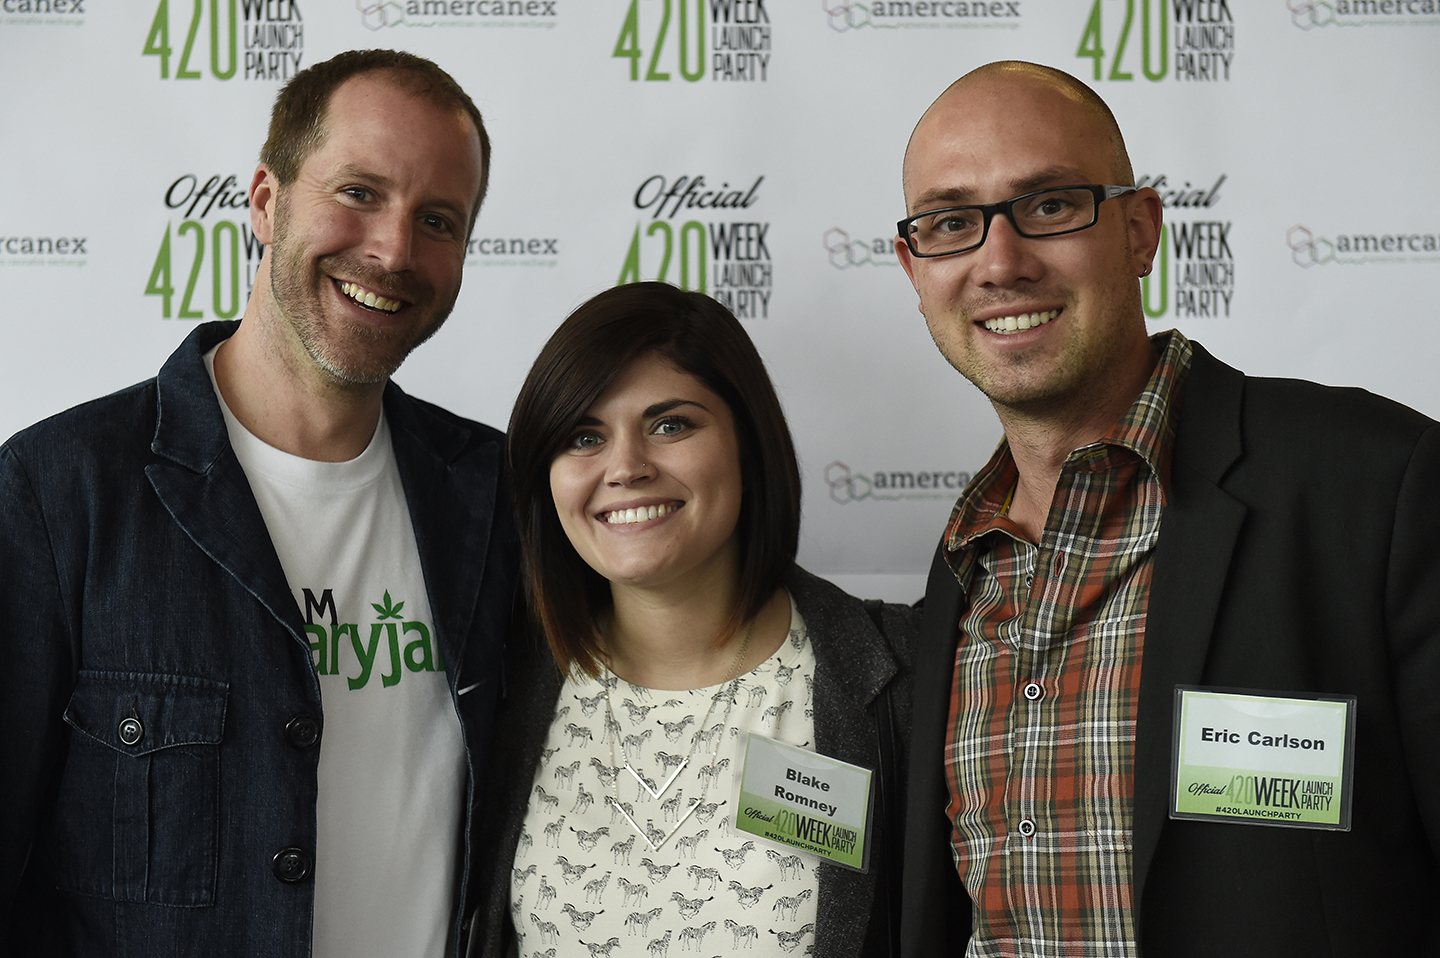 The Cannabist 420 Week Launch Party